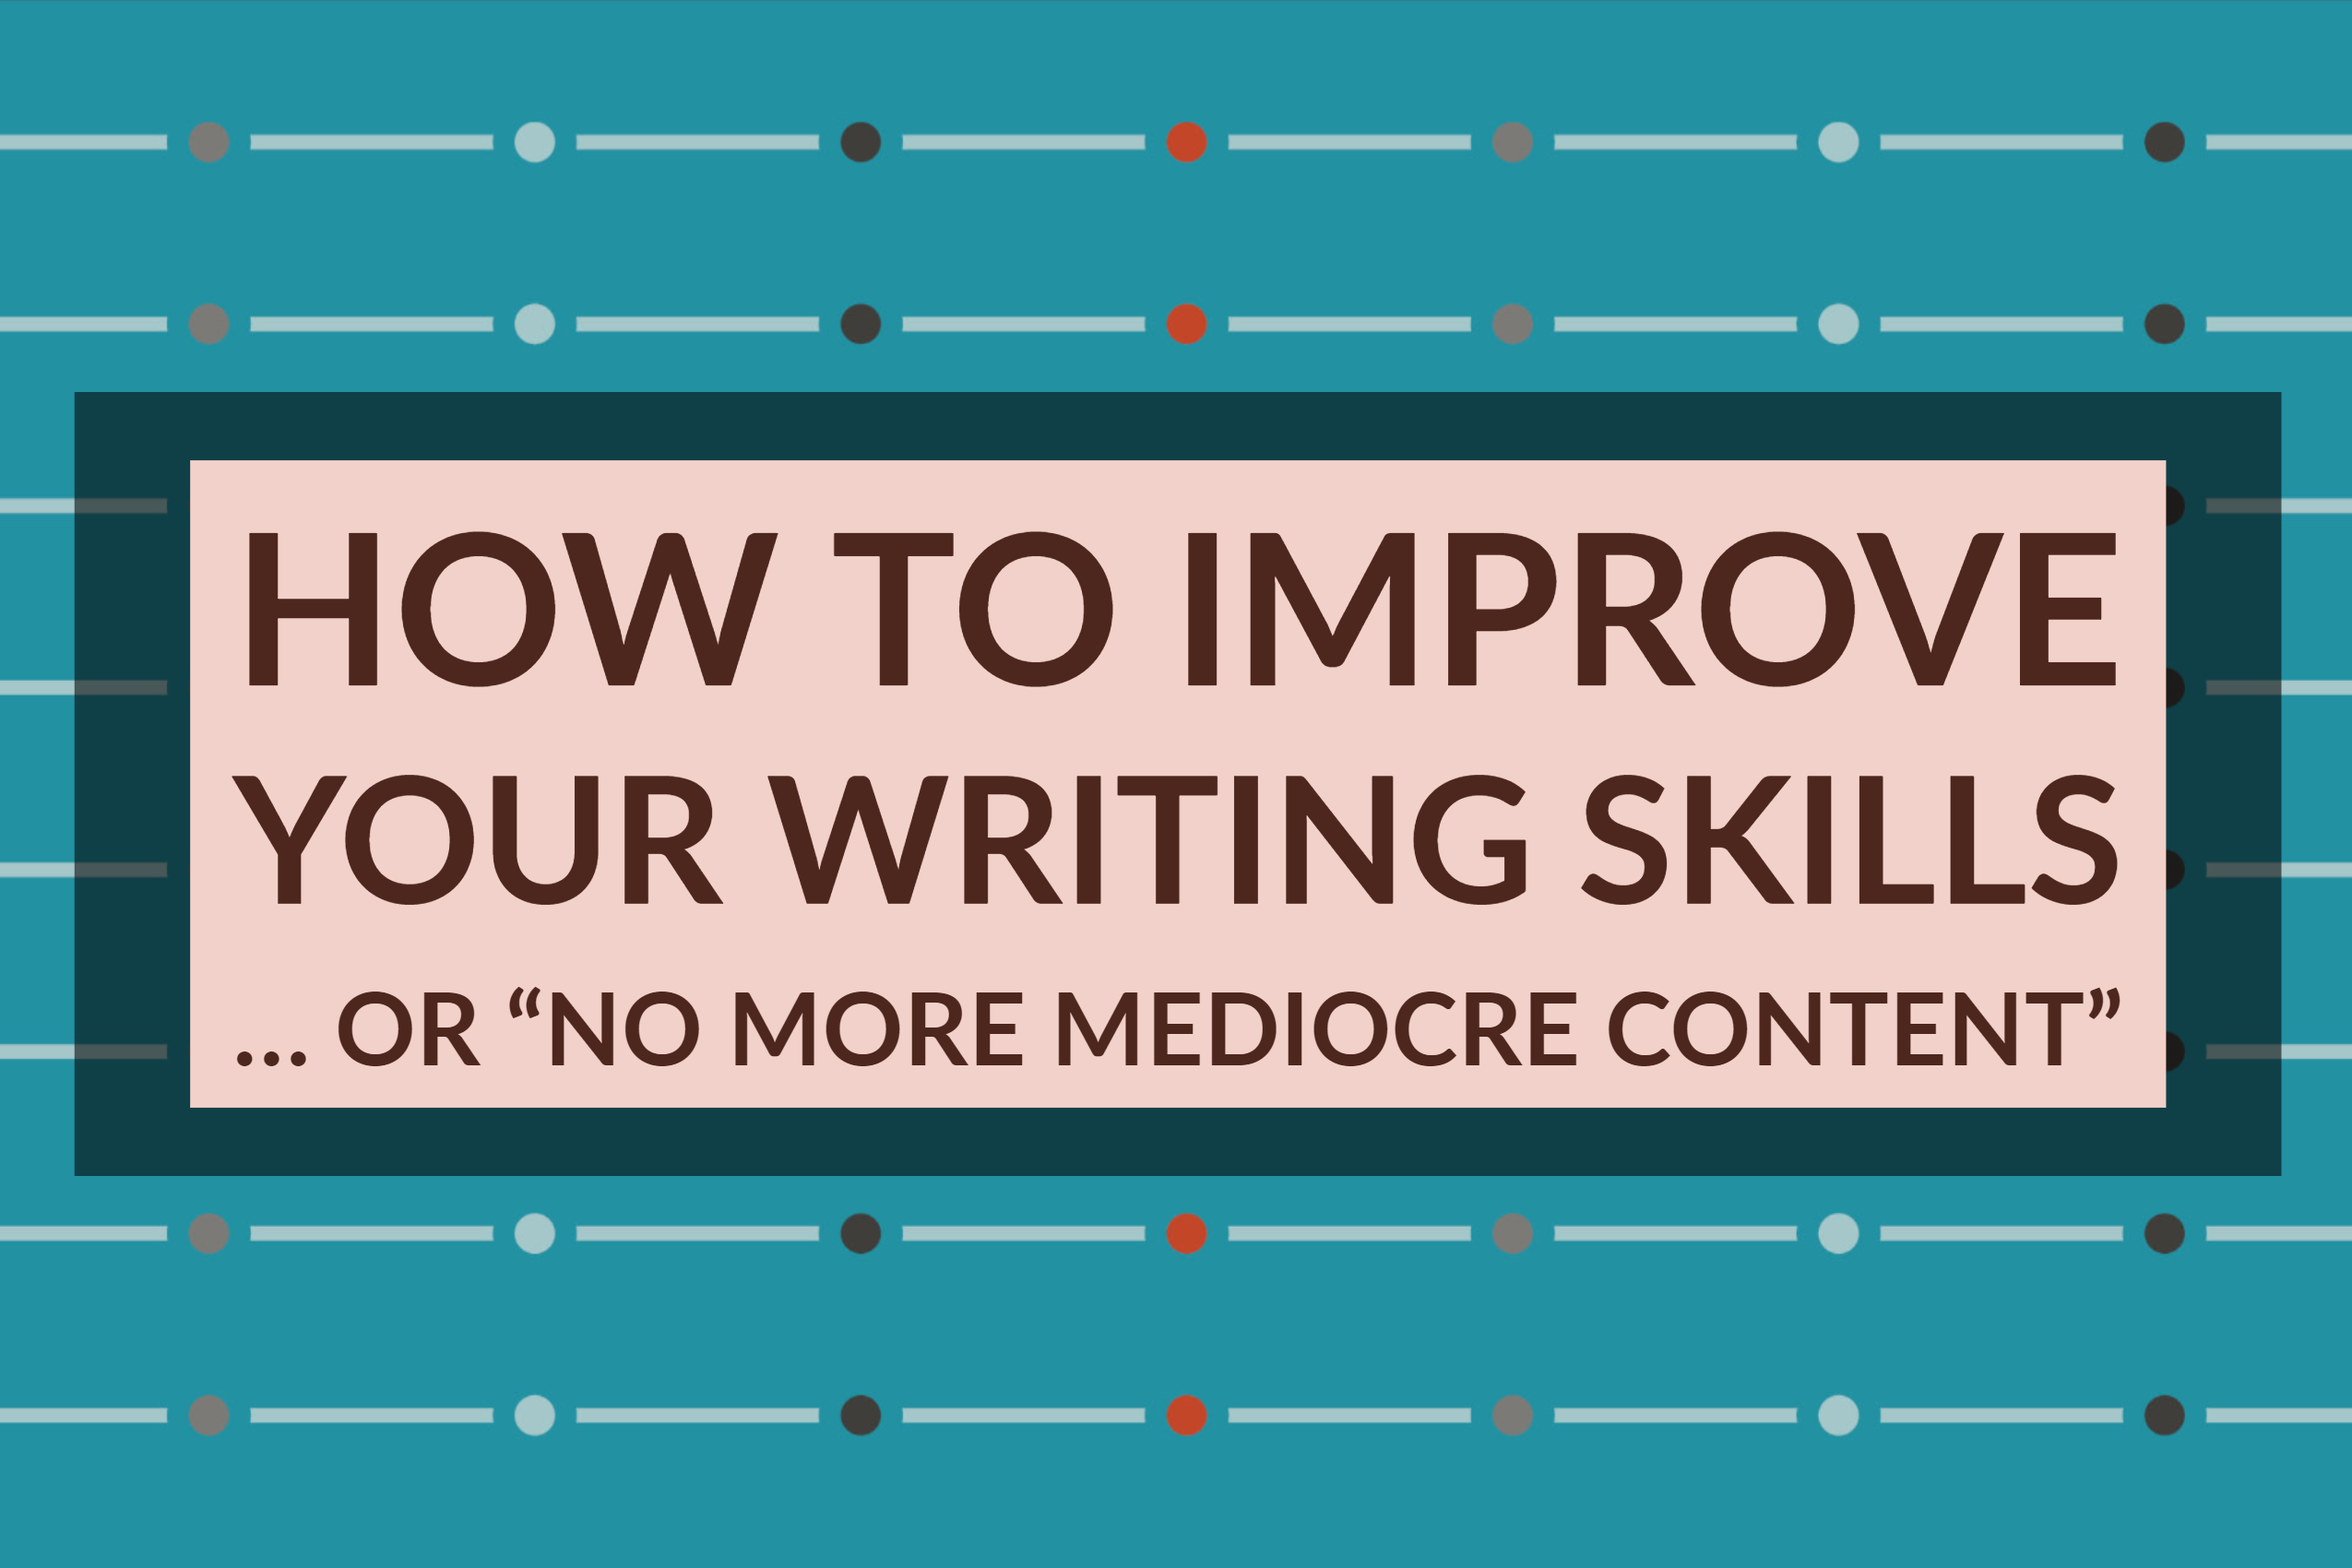 How To Improve Your Writing Skills … or “No More Mediocre Content”